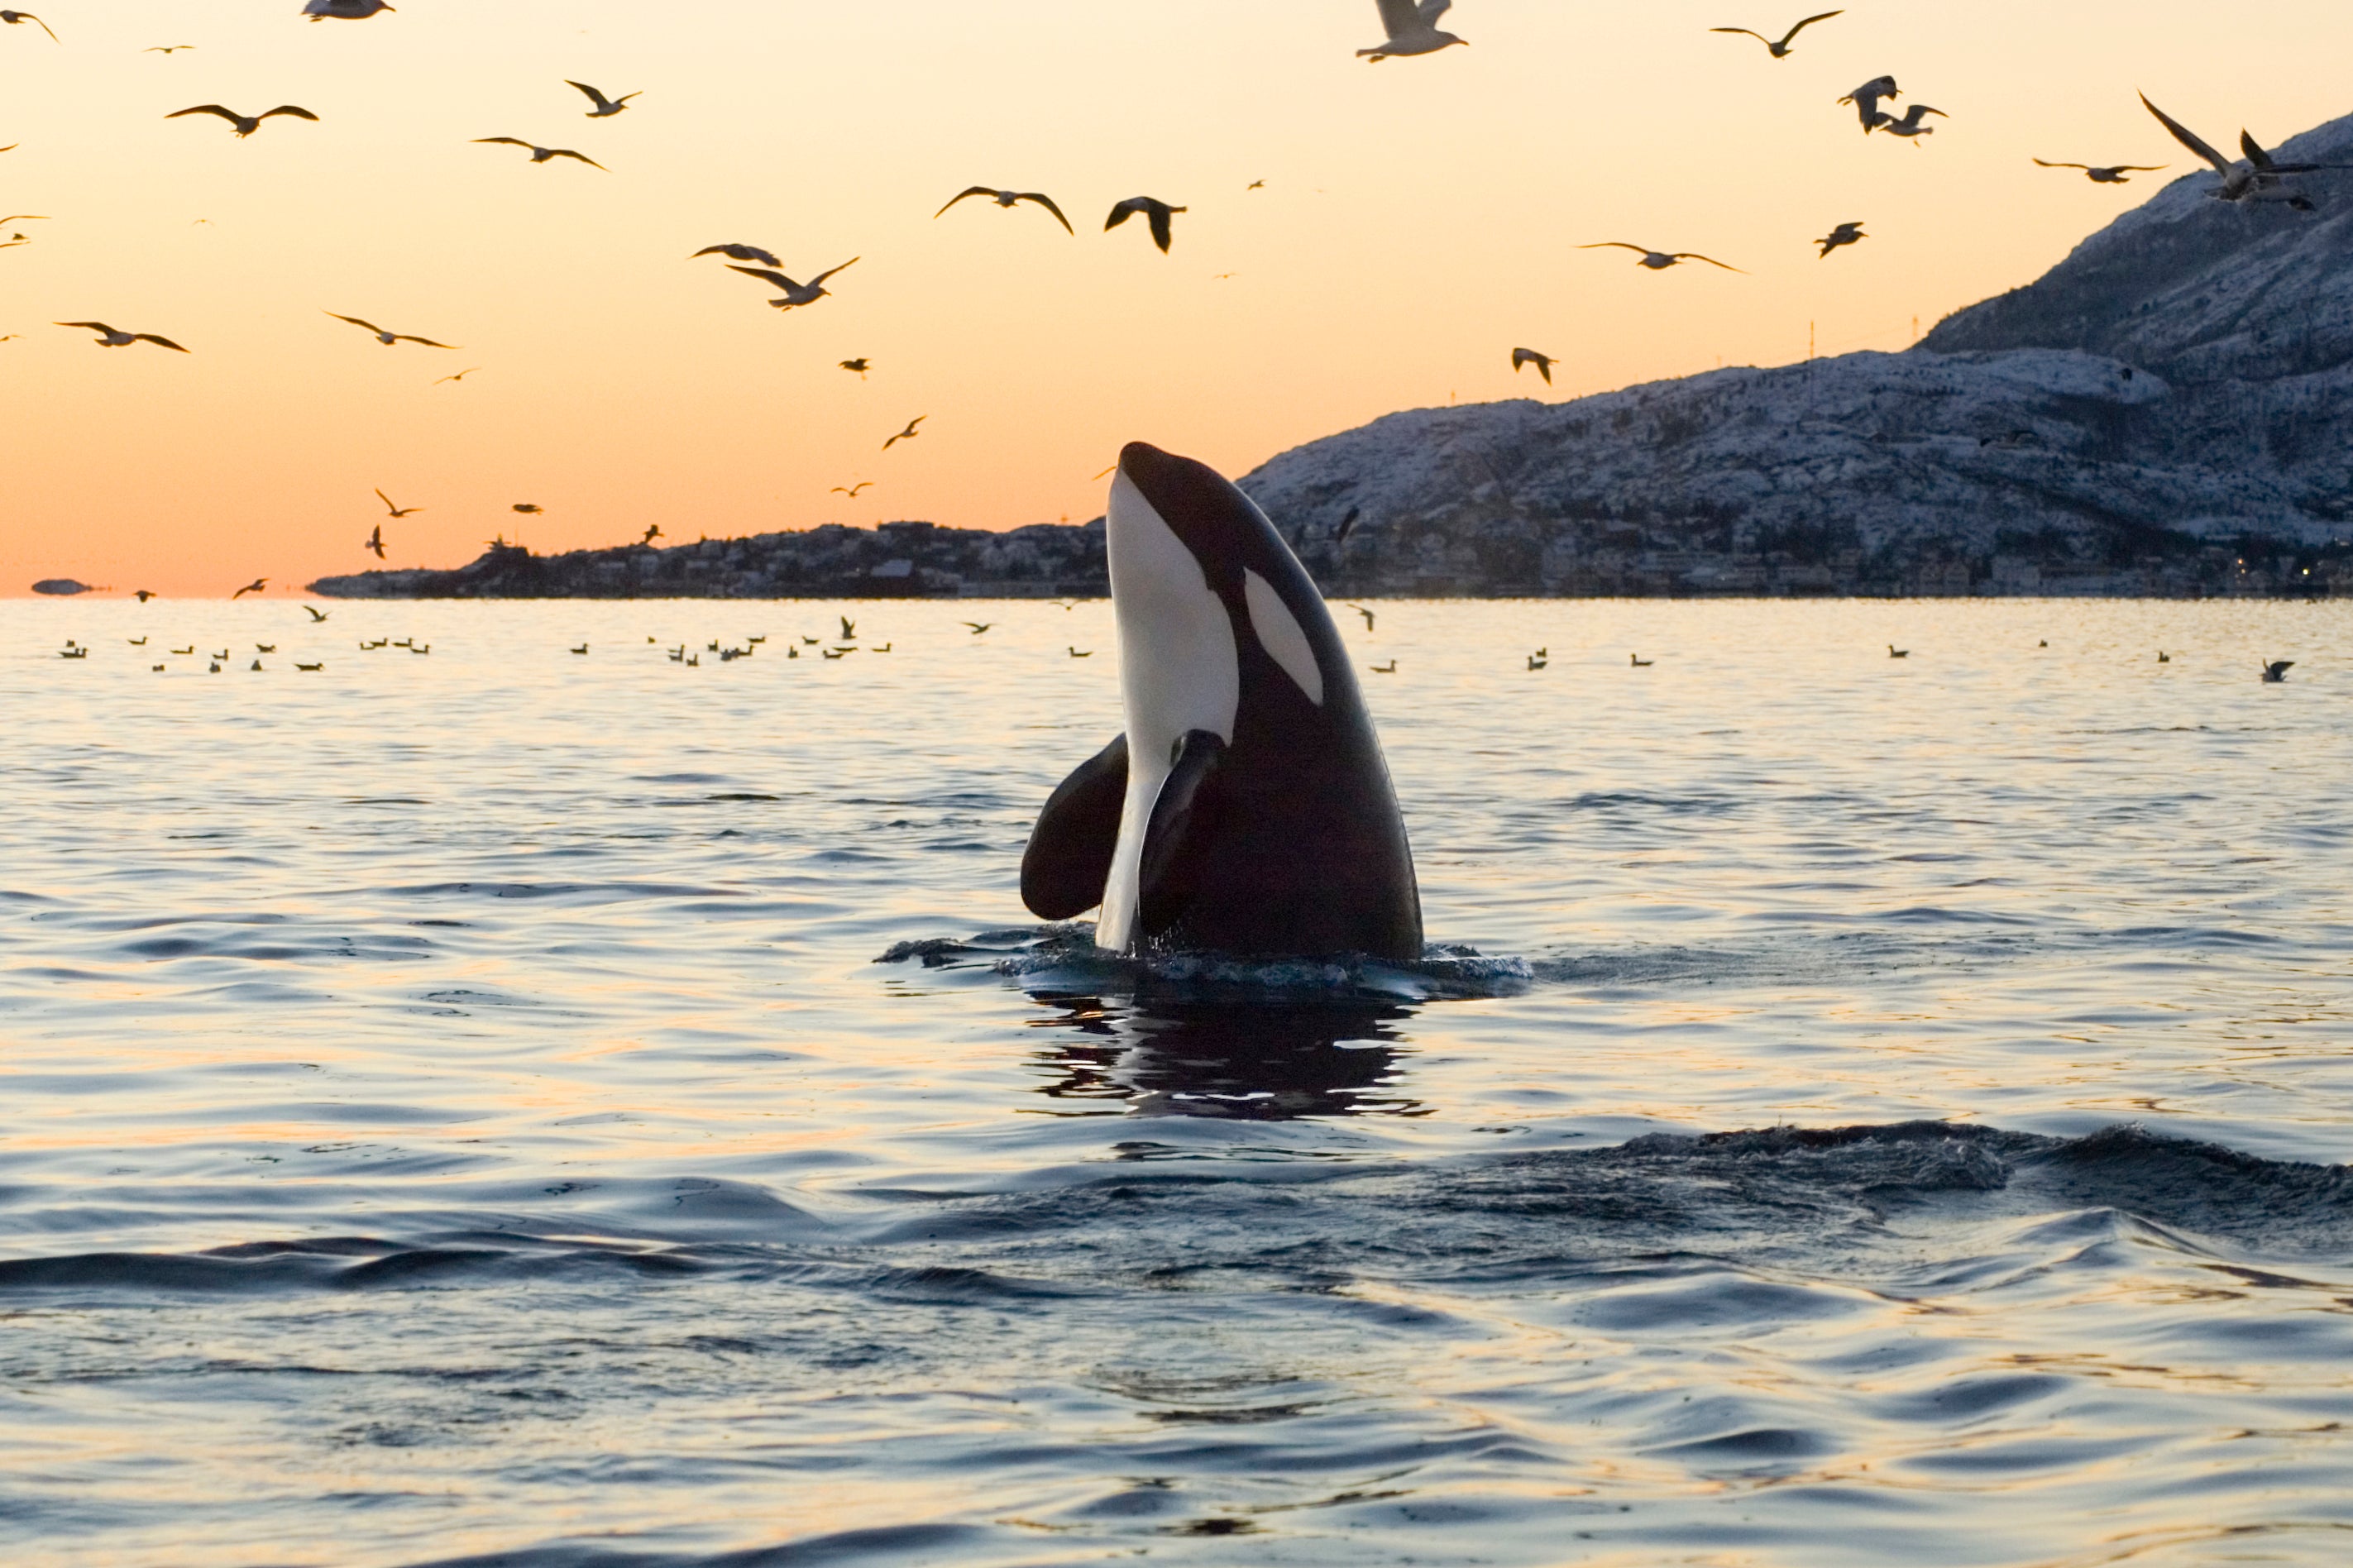 An orca spyhops to survey its surroundings. (iStockphoto)